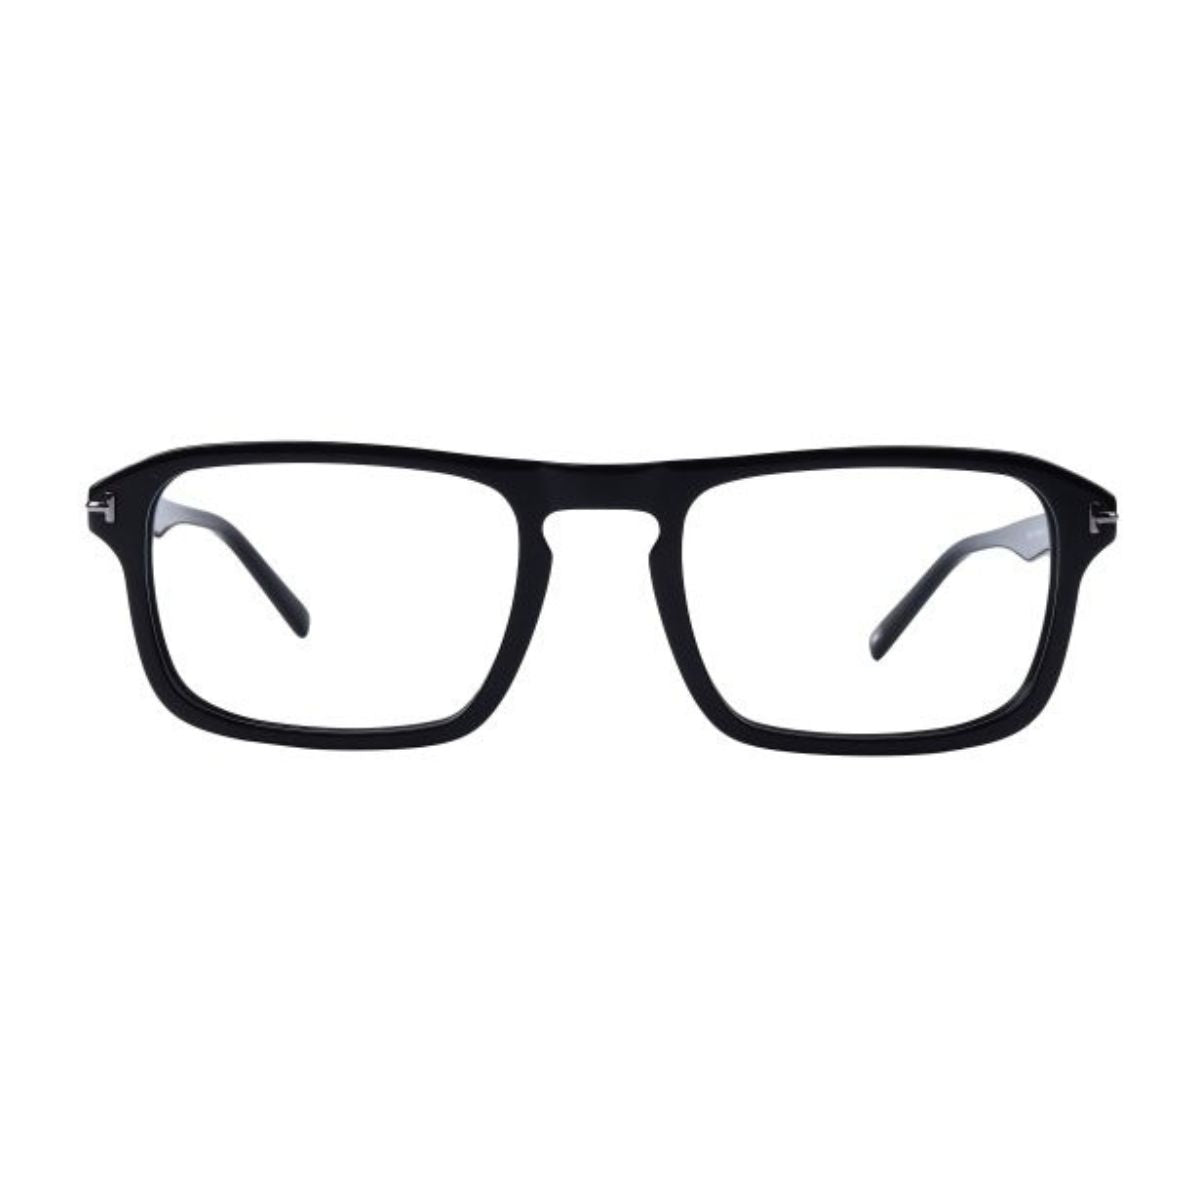 "buy Tommy Hilfiger 3235 C1 spectacle frame for men's and women's online at optorium"